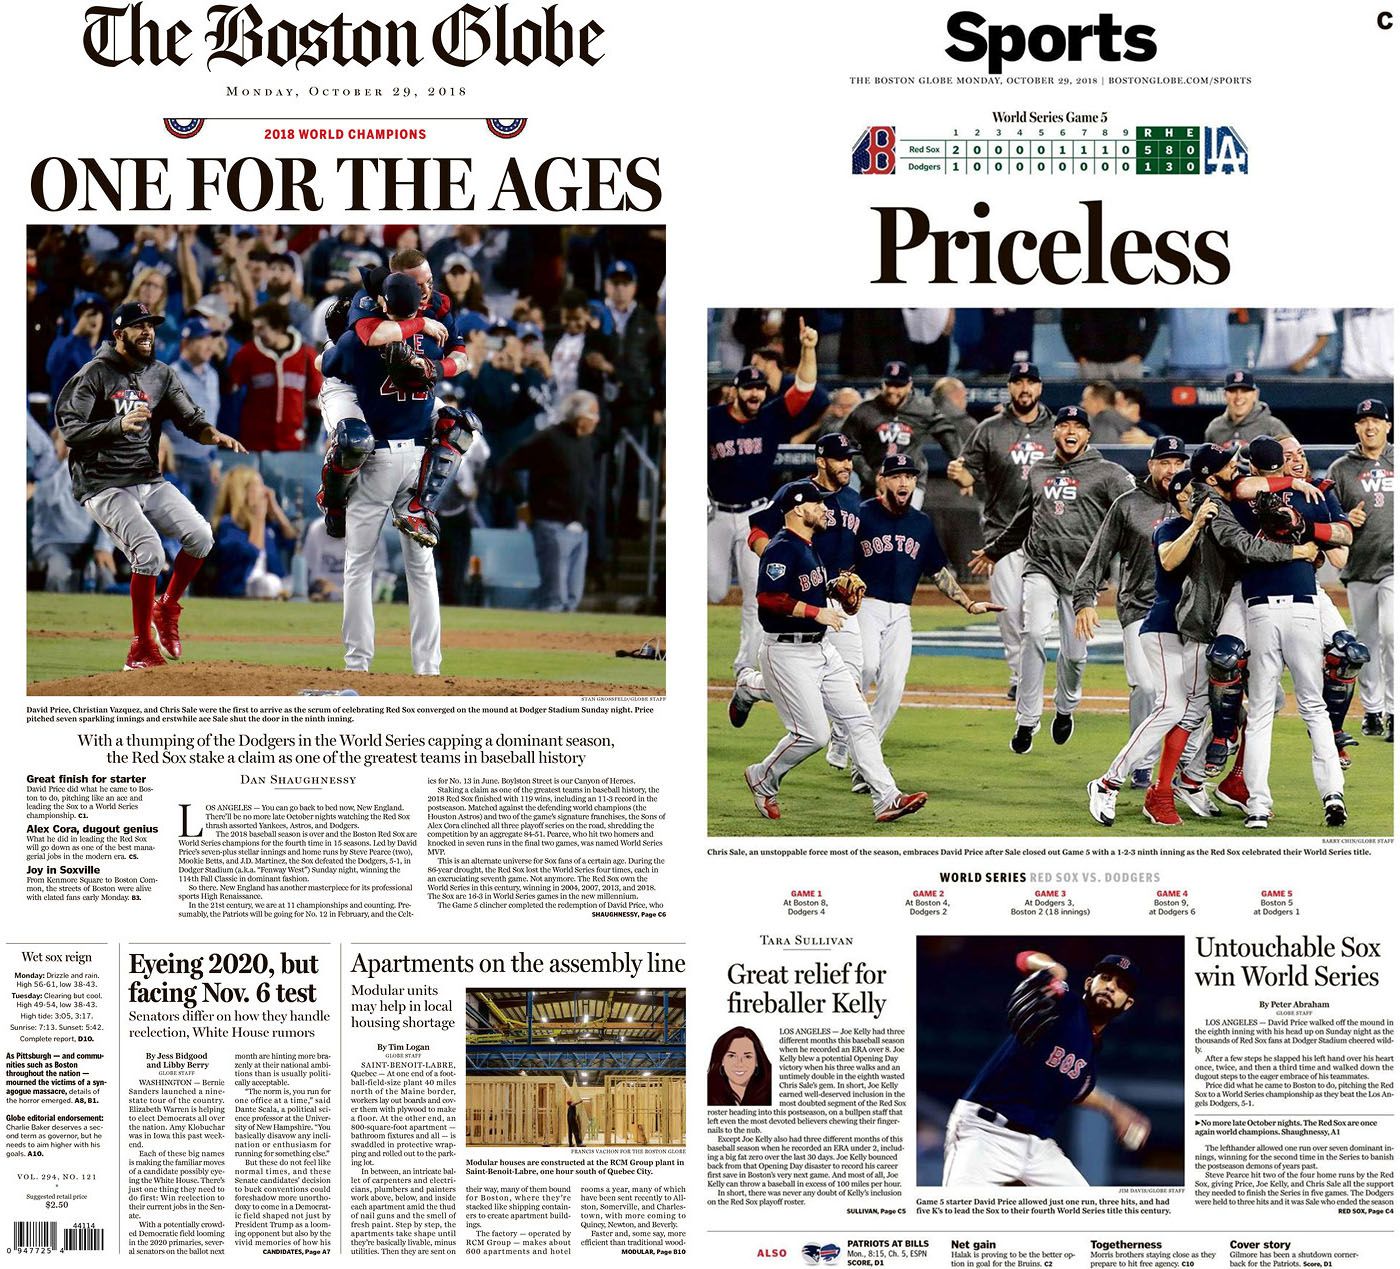 Gallery: Front pages a day after Red Sox topple Dodgers in World Series